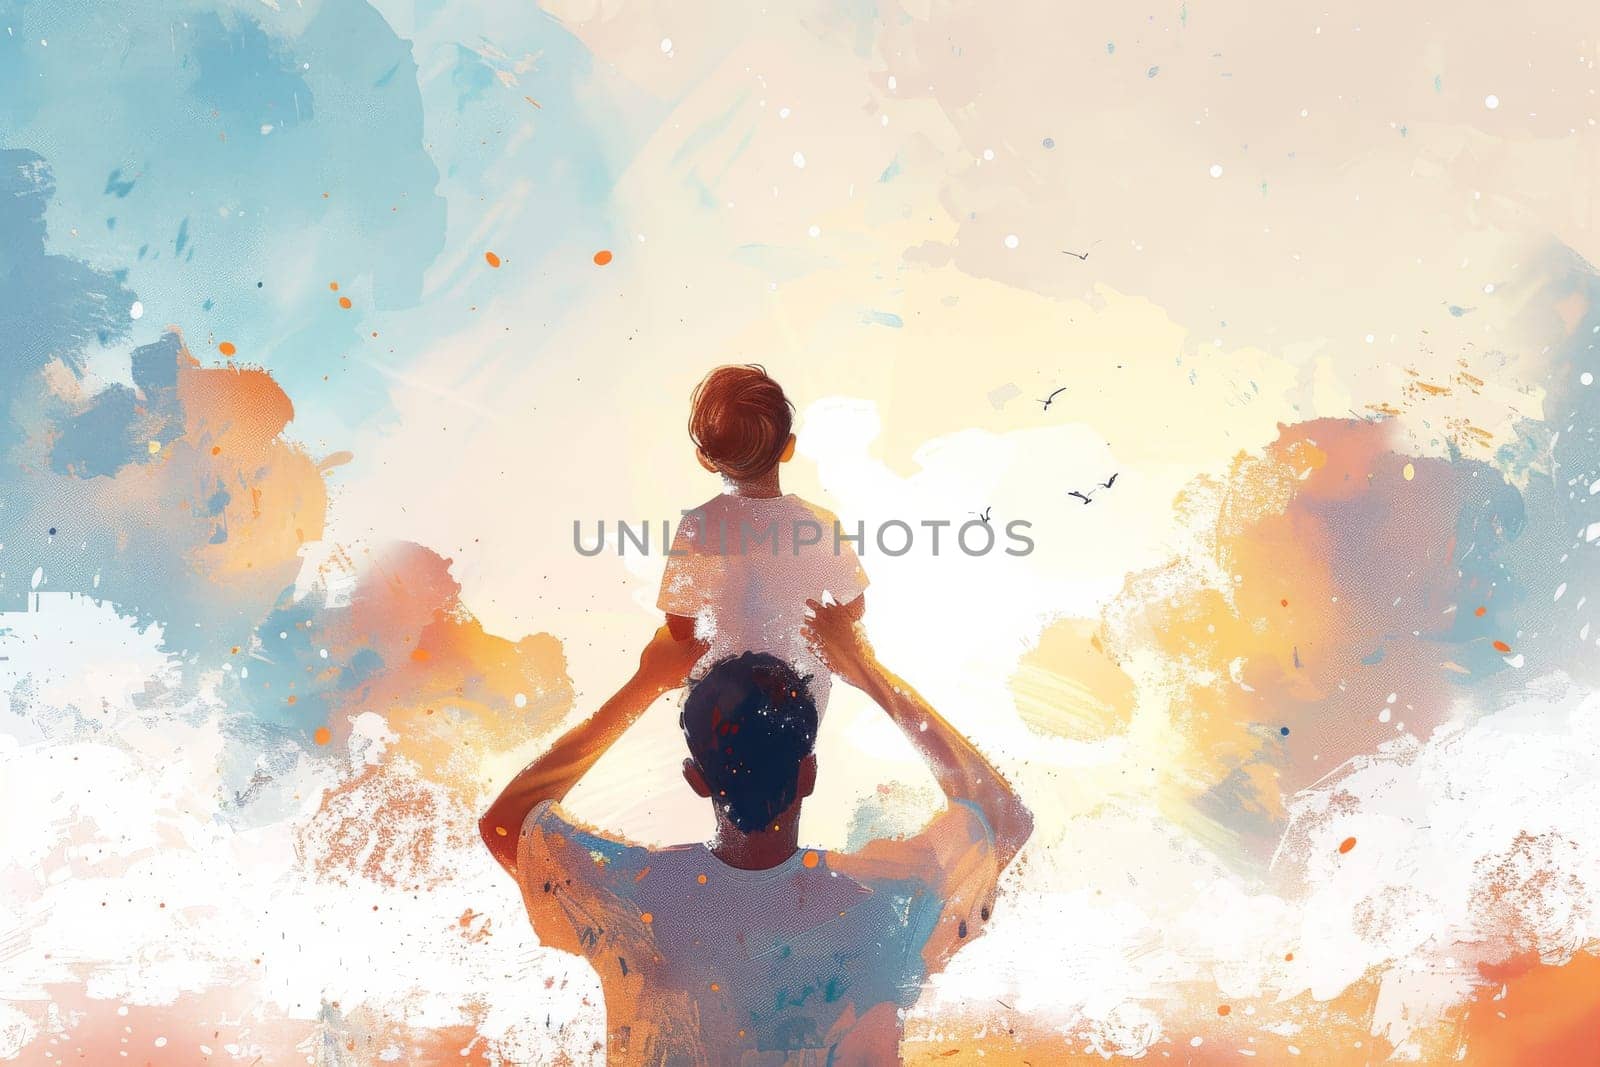 A man is holding a child in his arms. The child is wearing a white shirt. The sky is blue and the sun is shining